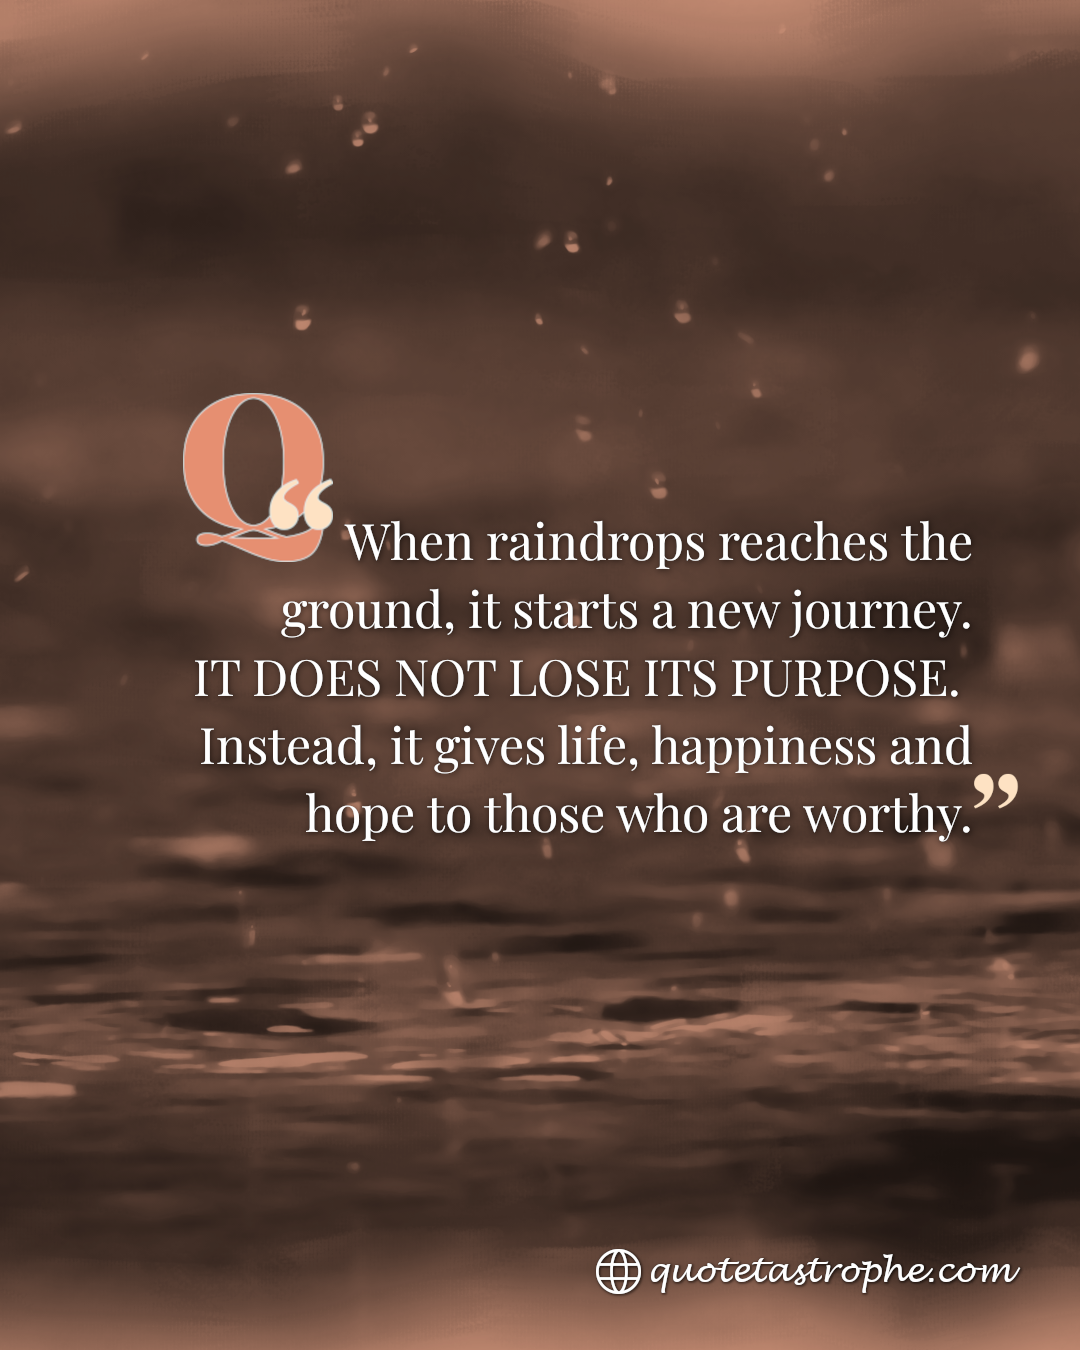 When Raindrops Reaches Ground It Doesn't Lose Purpose